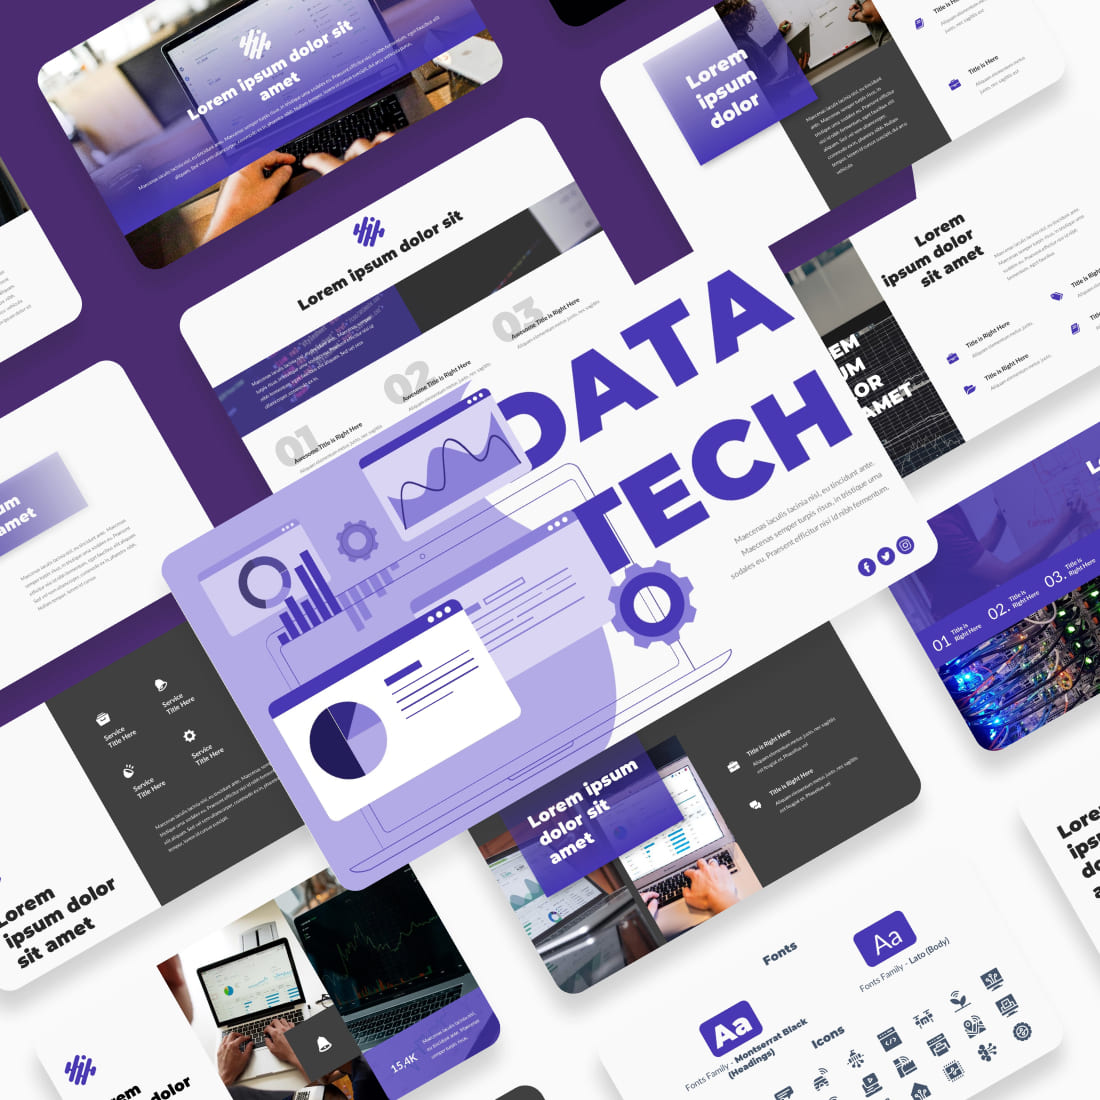 Data Technology Keynote Template cover image.